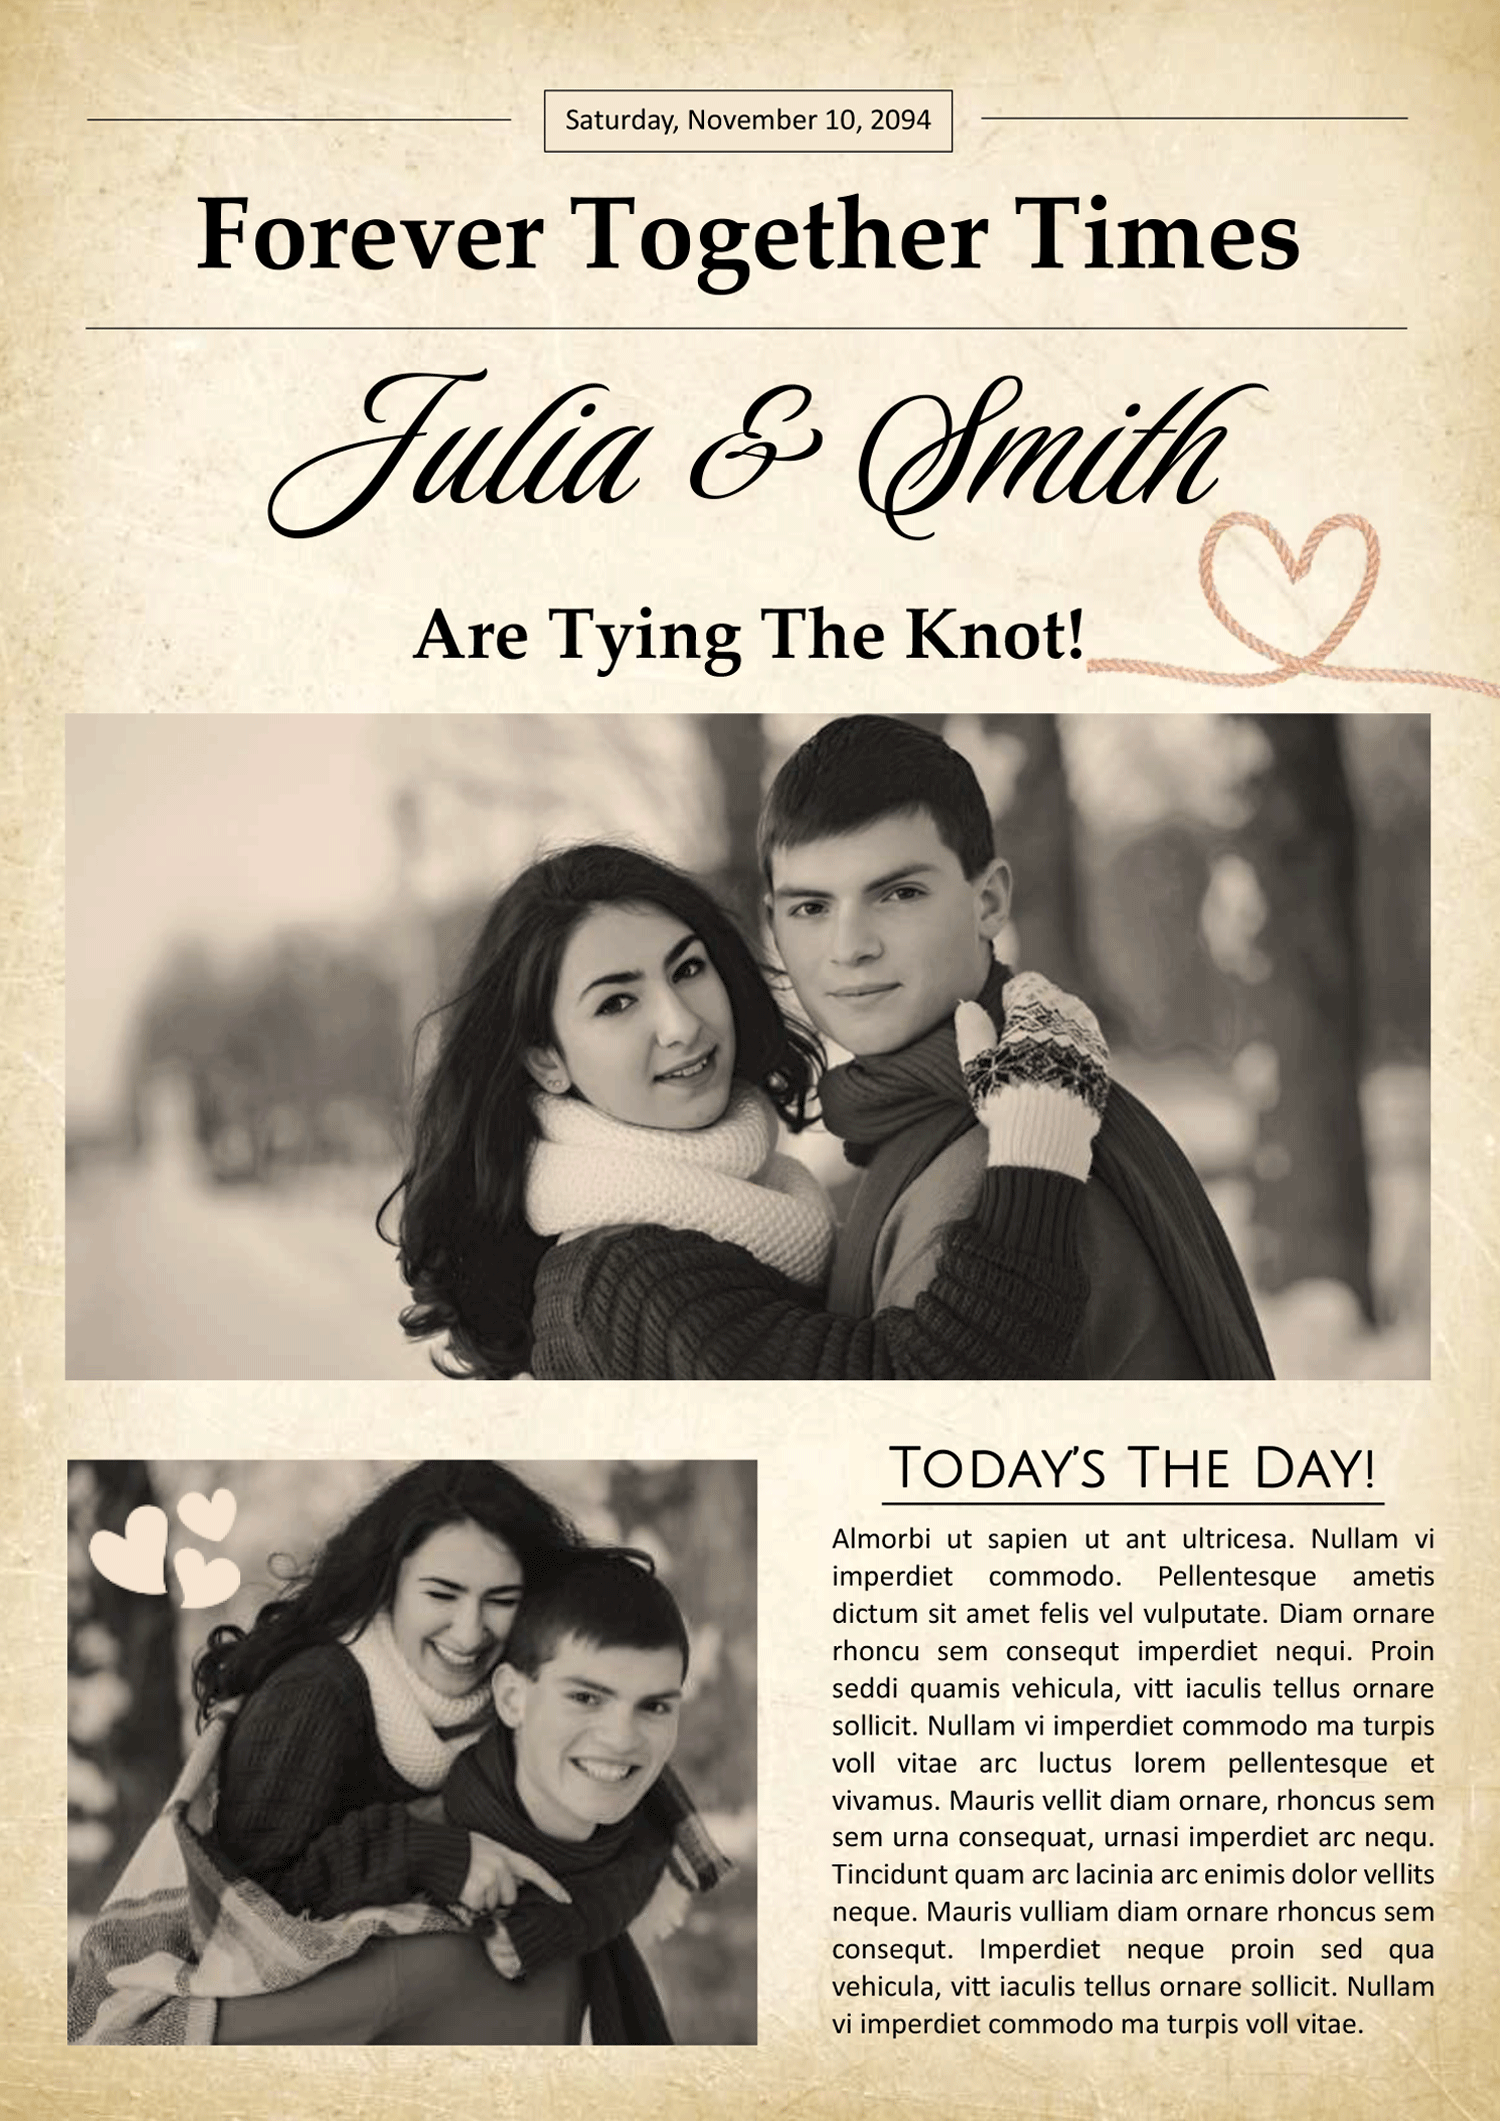 Vintage Themed Wedding Program Newspaper Template - Front Page